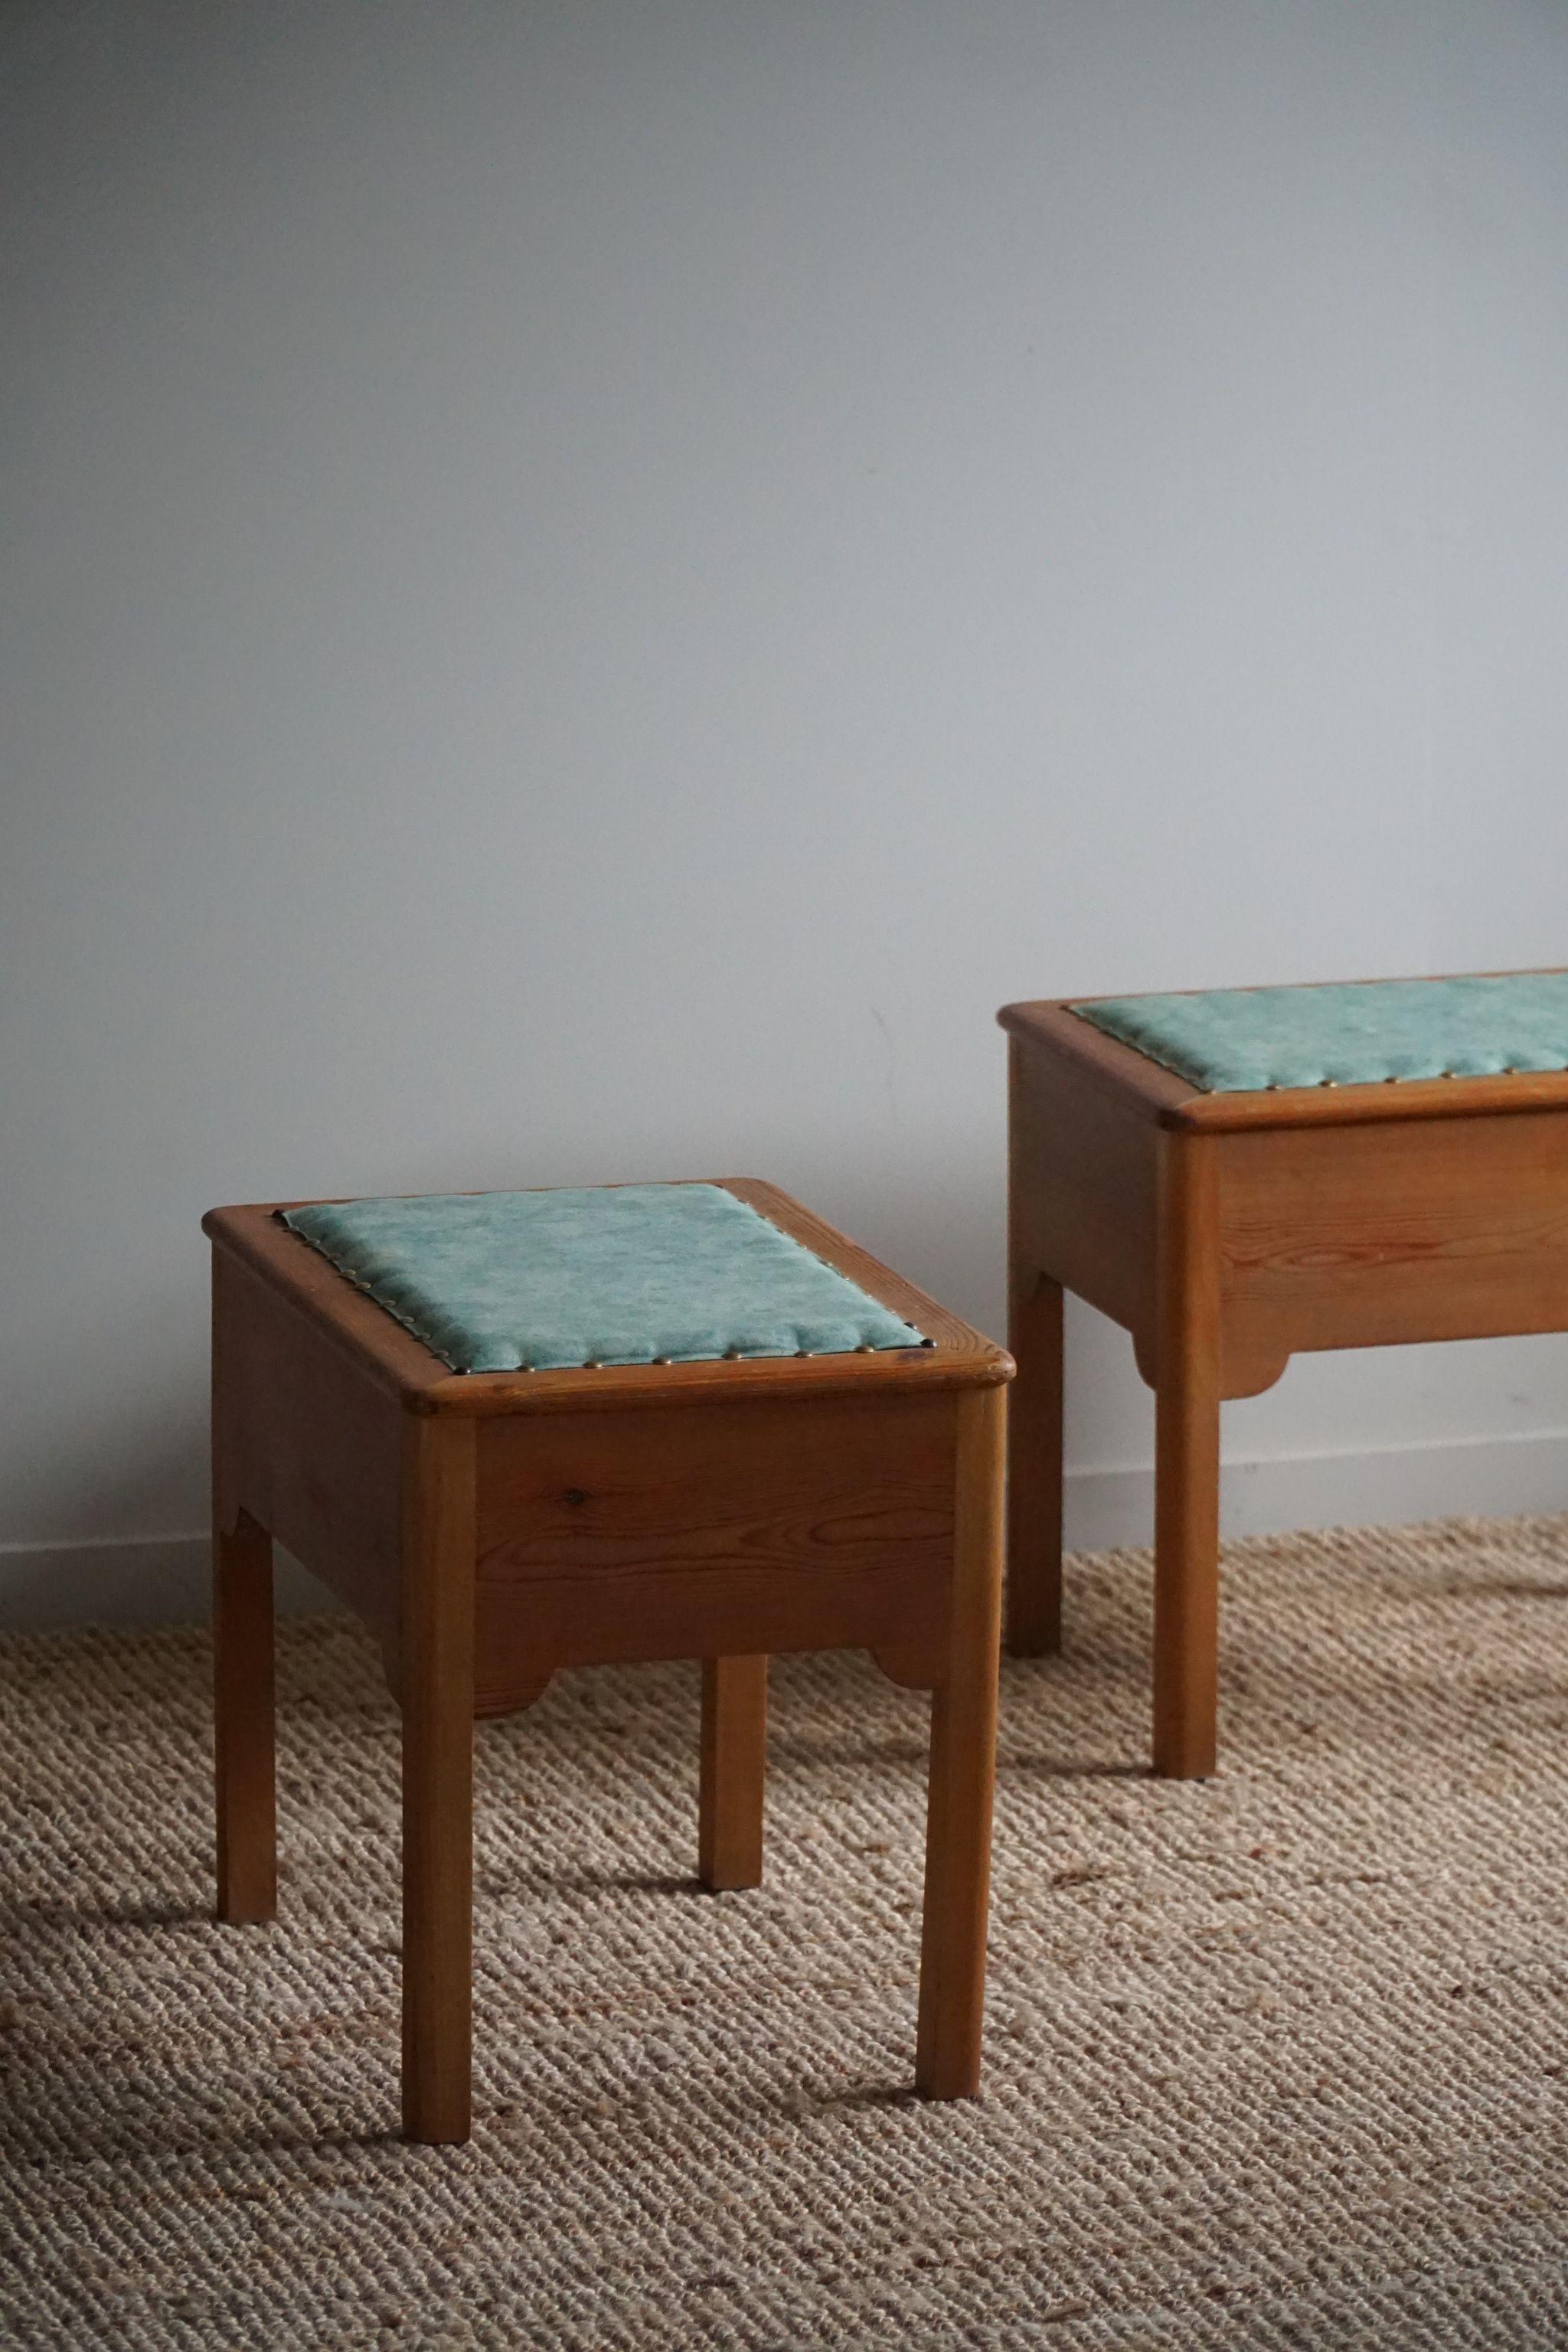 A Pair of Stools in Pine & Fabric with Storage, By a Swedish Cabinetmaker, 1950s For Sale 7